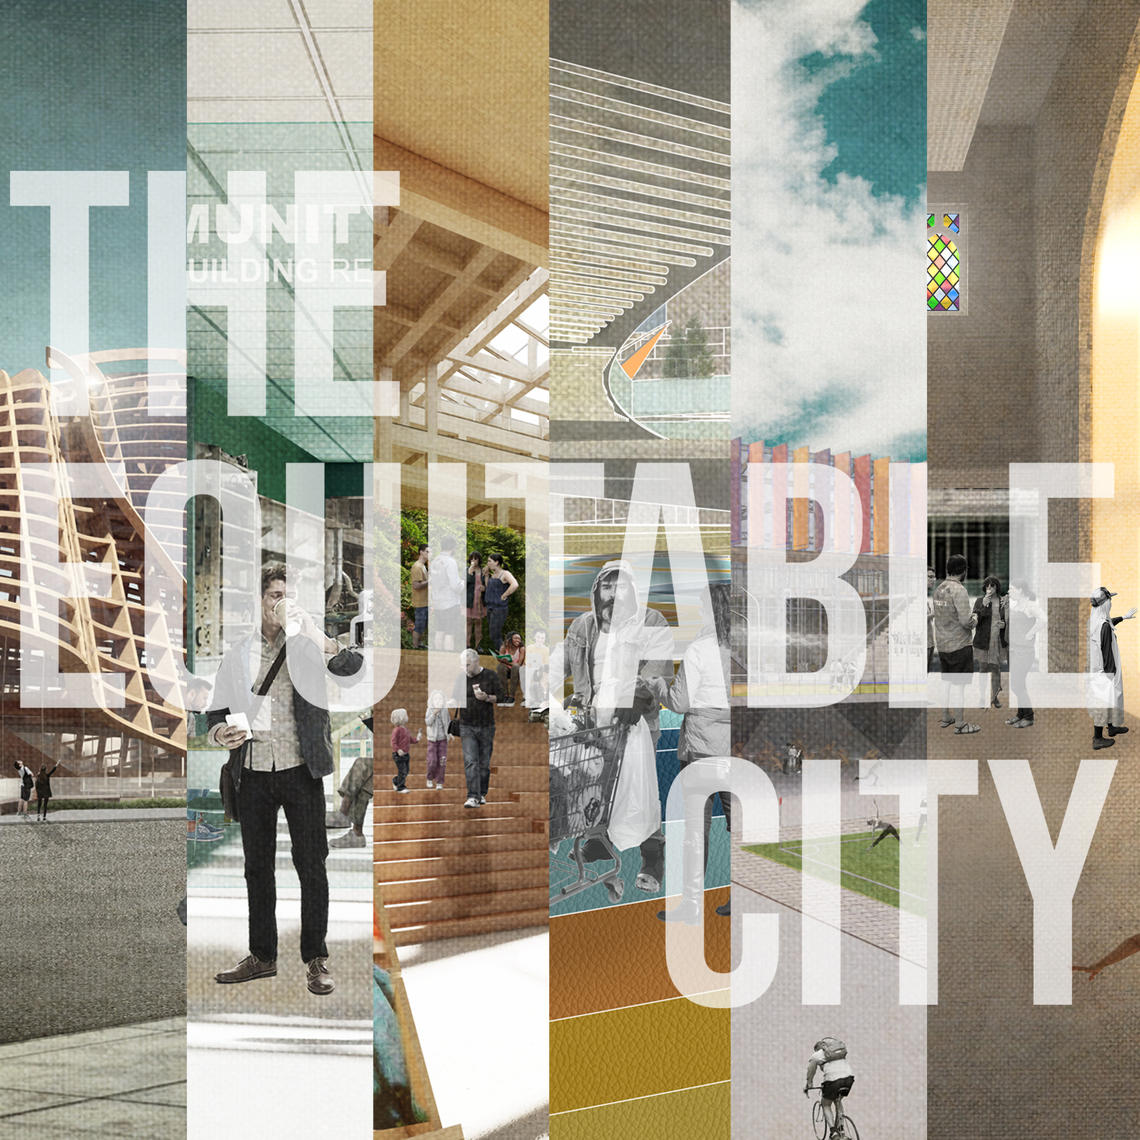 The Equitable City - image by T. Leong